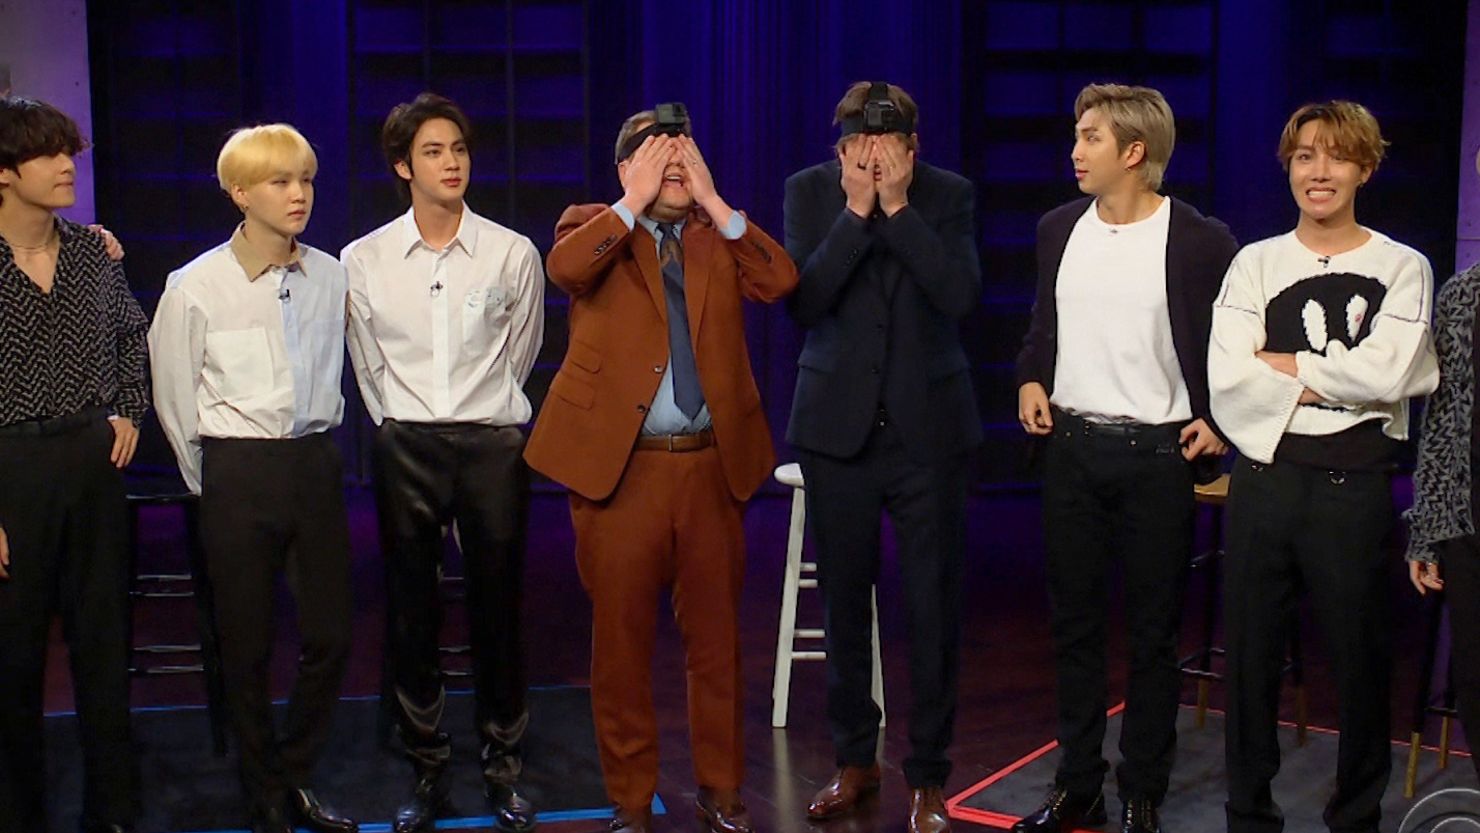 K-pop group BTS debuted their new single on "The Late Late Show with James Corden" on Tuesday, January 28.